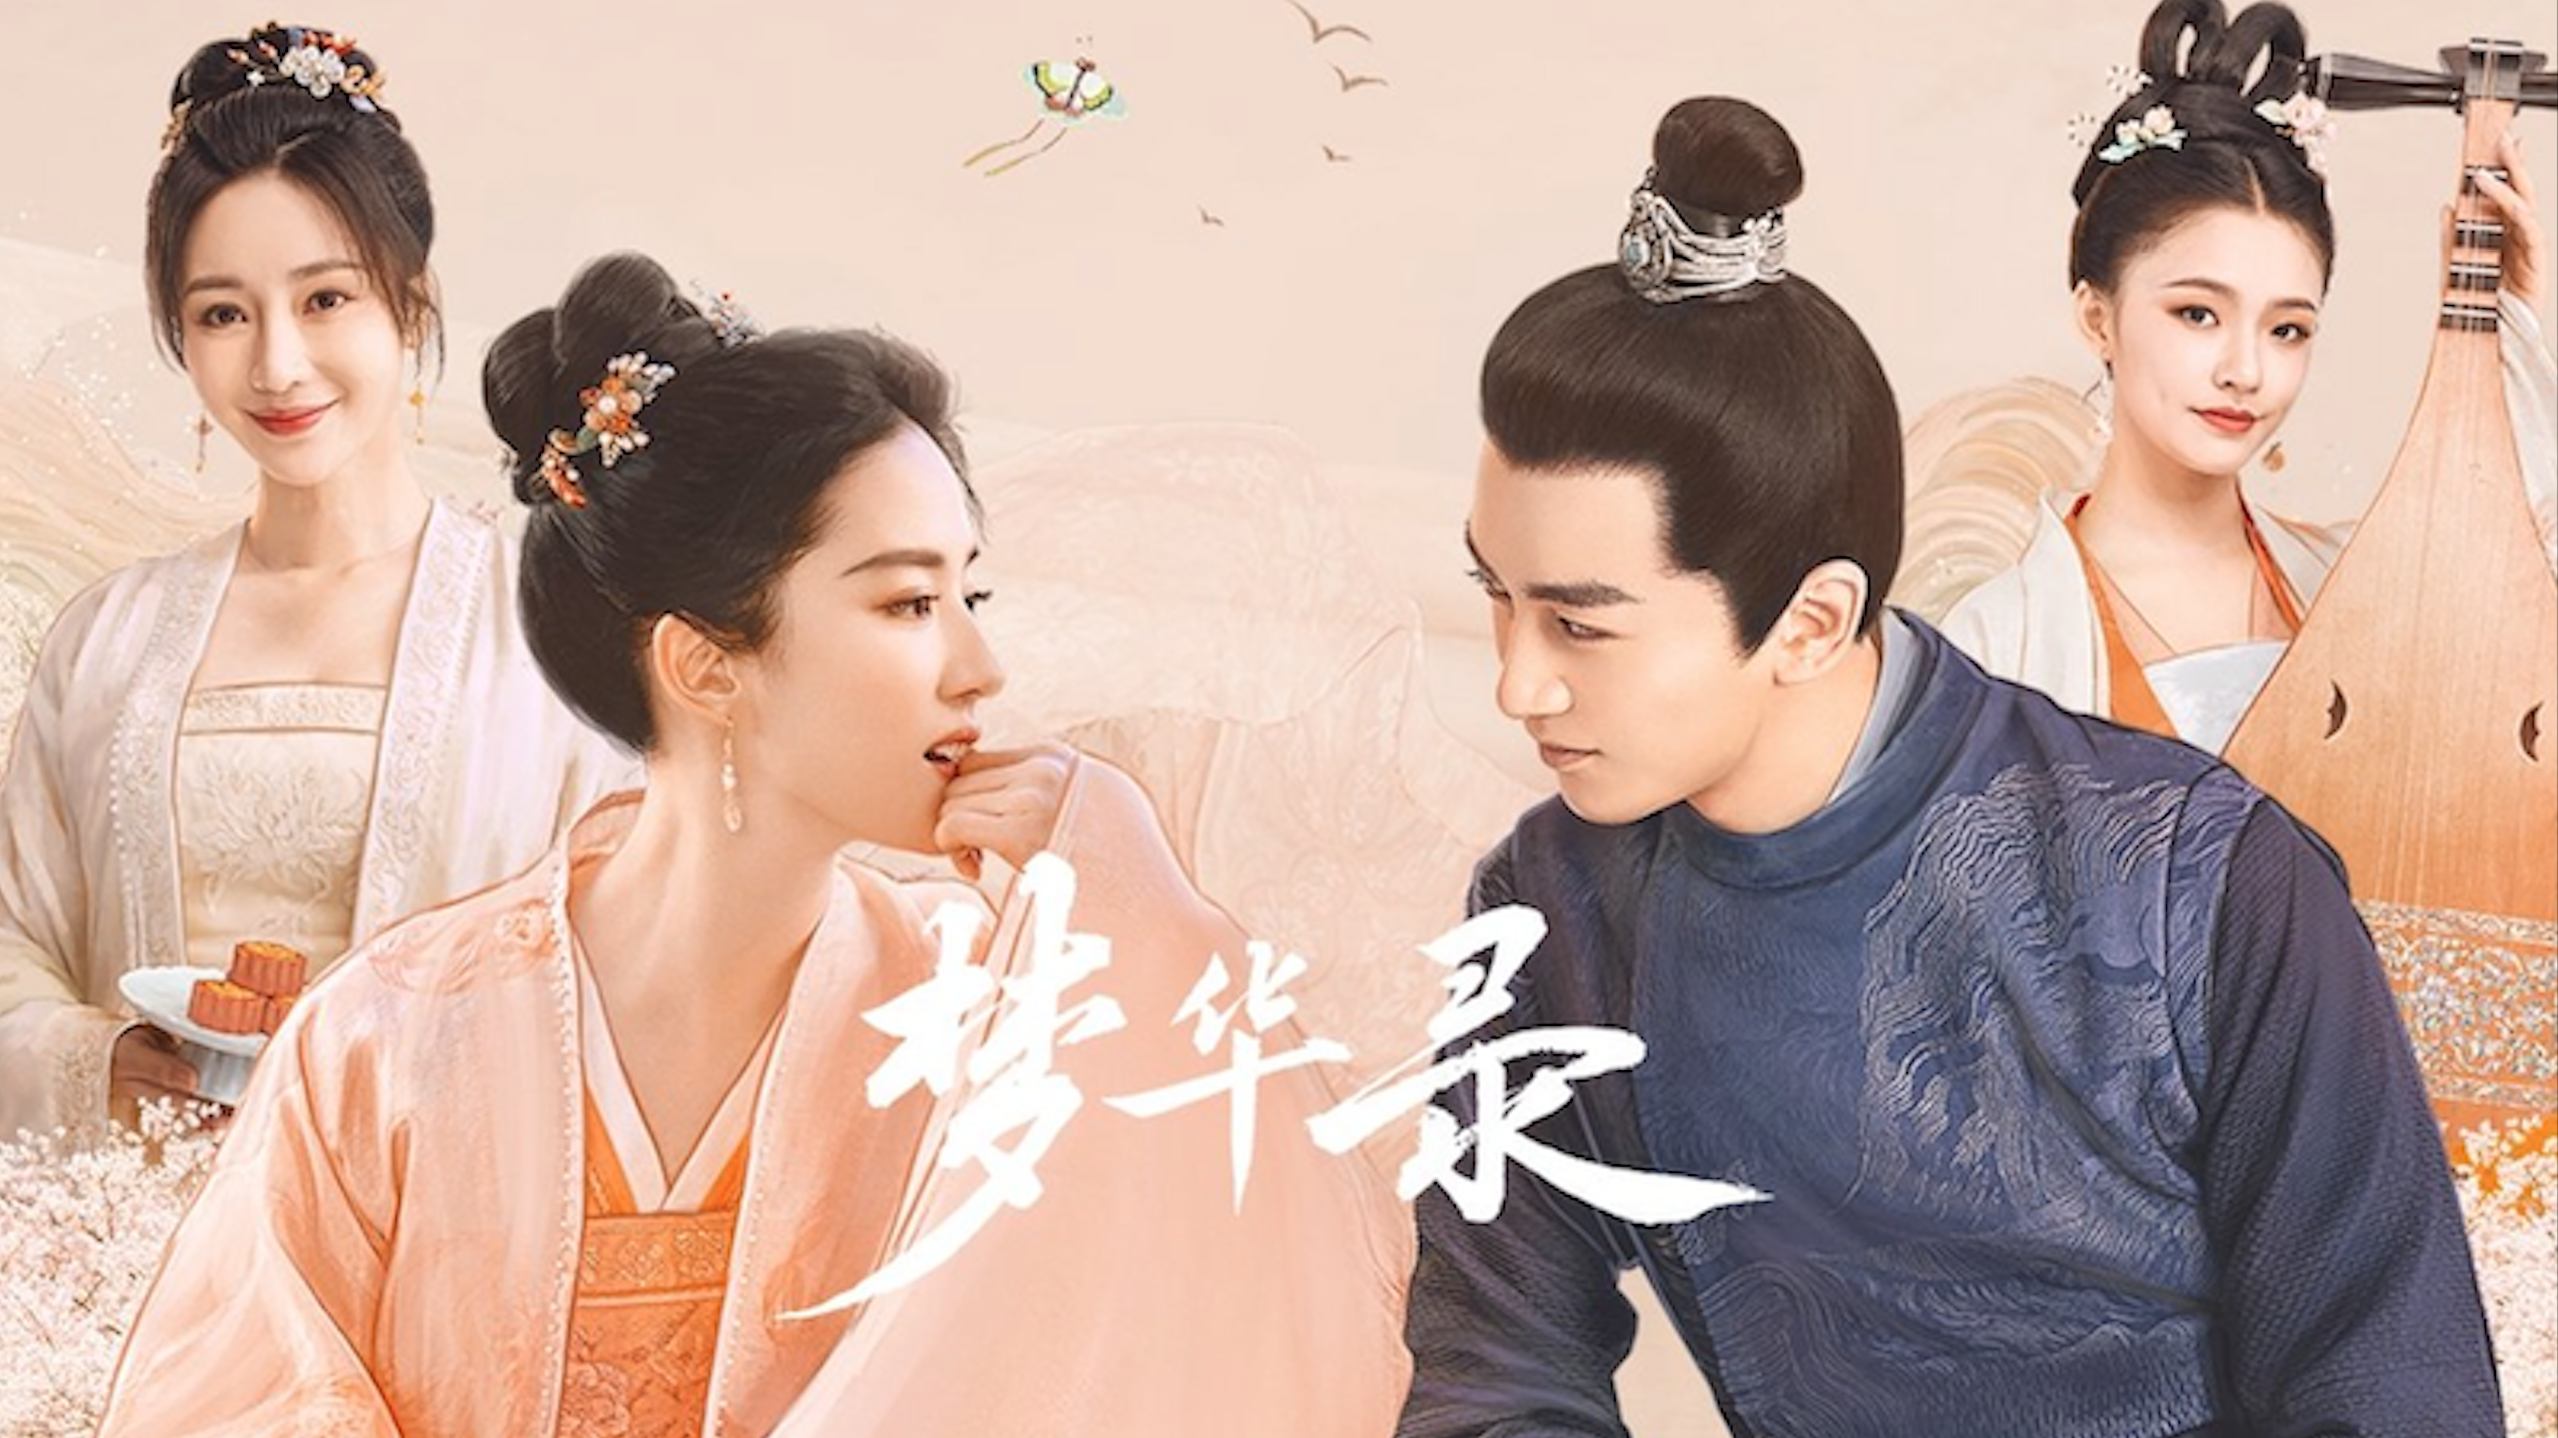 Local brands are rushing to join hands with China’s hit series of the year, A Dream of Splendor. Will C-drama IP collaboration be the new marketing craze? Photo: Tencent Video
